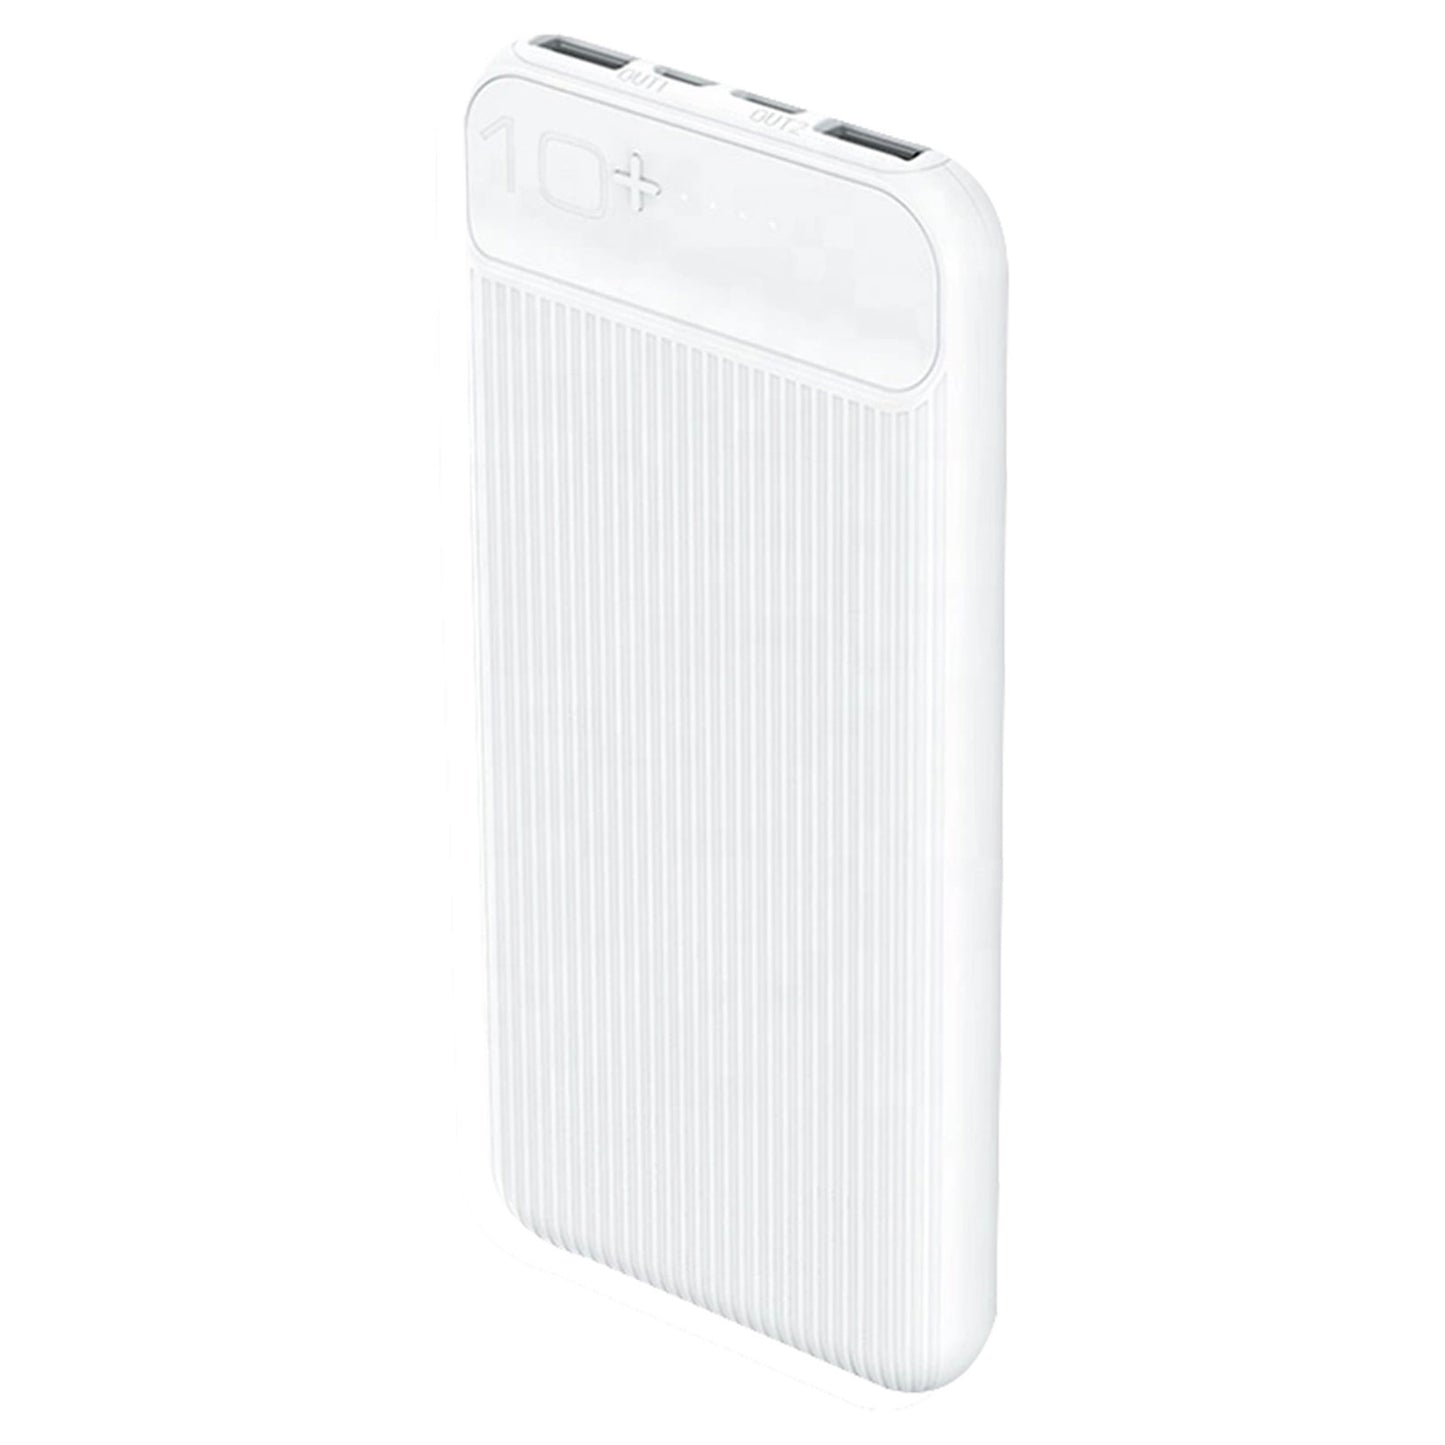 Prevo SP3012 Power bank,10000mAh Portable Fast Charging for Smart Phones, Tablets and Other Devices